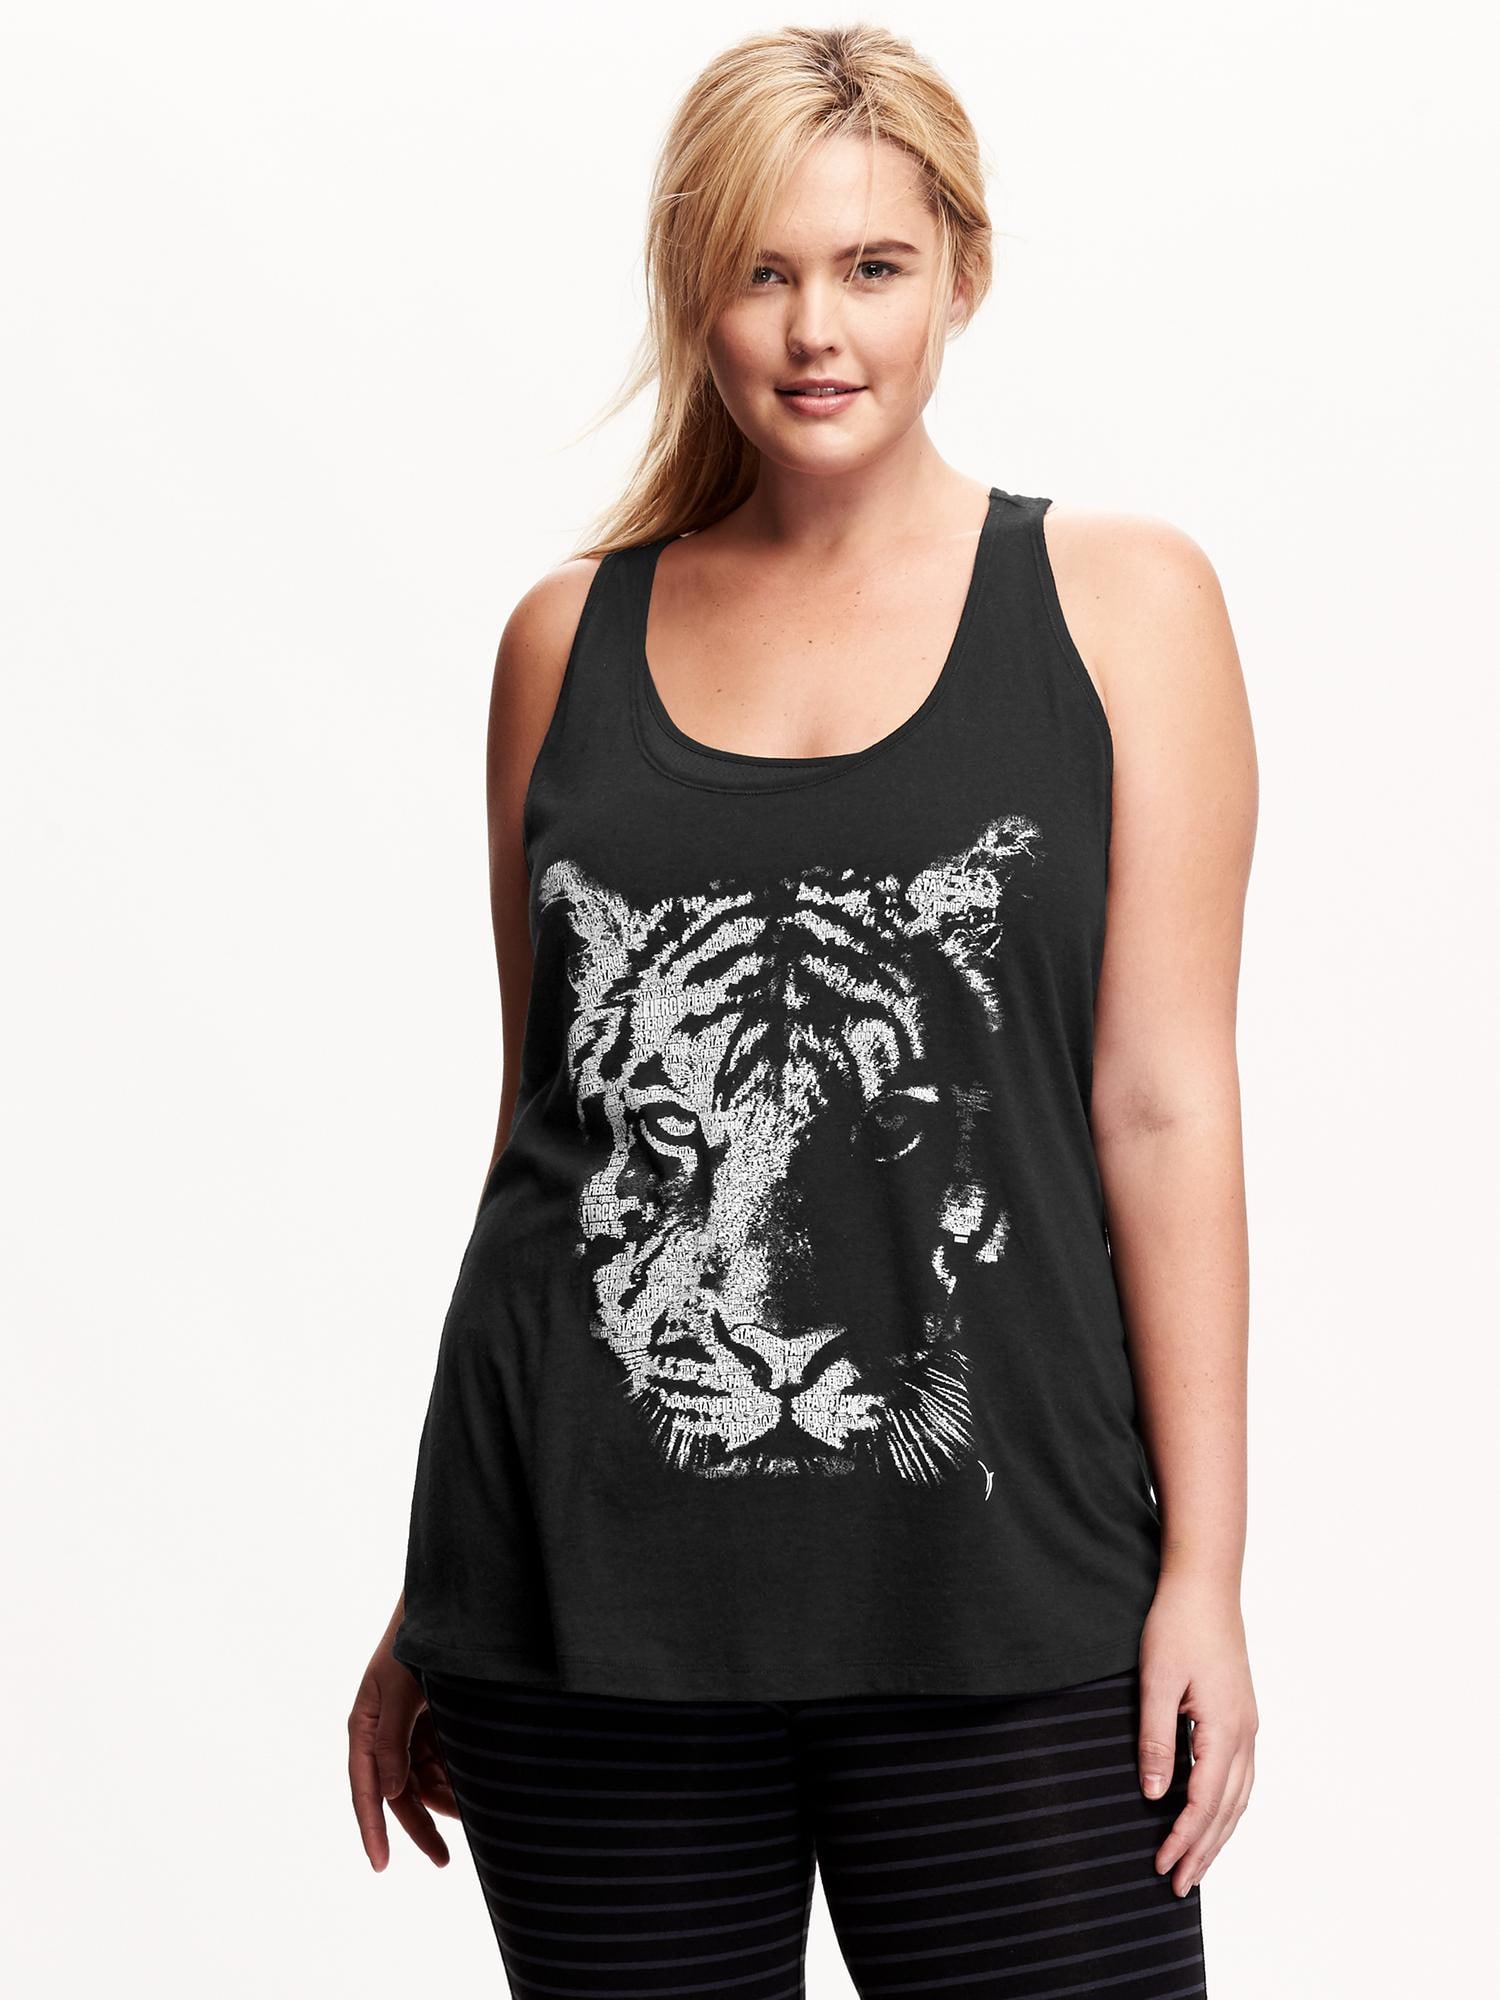 Go-Dry Plus-Size Graphic Tank | Old Navy